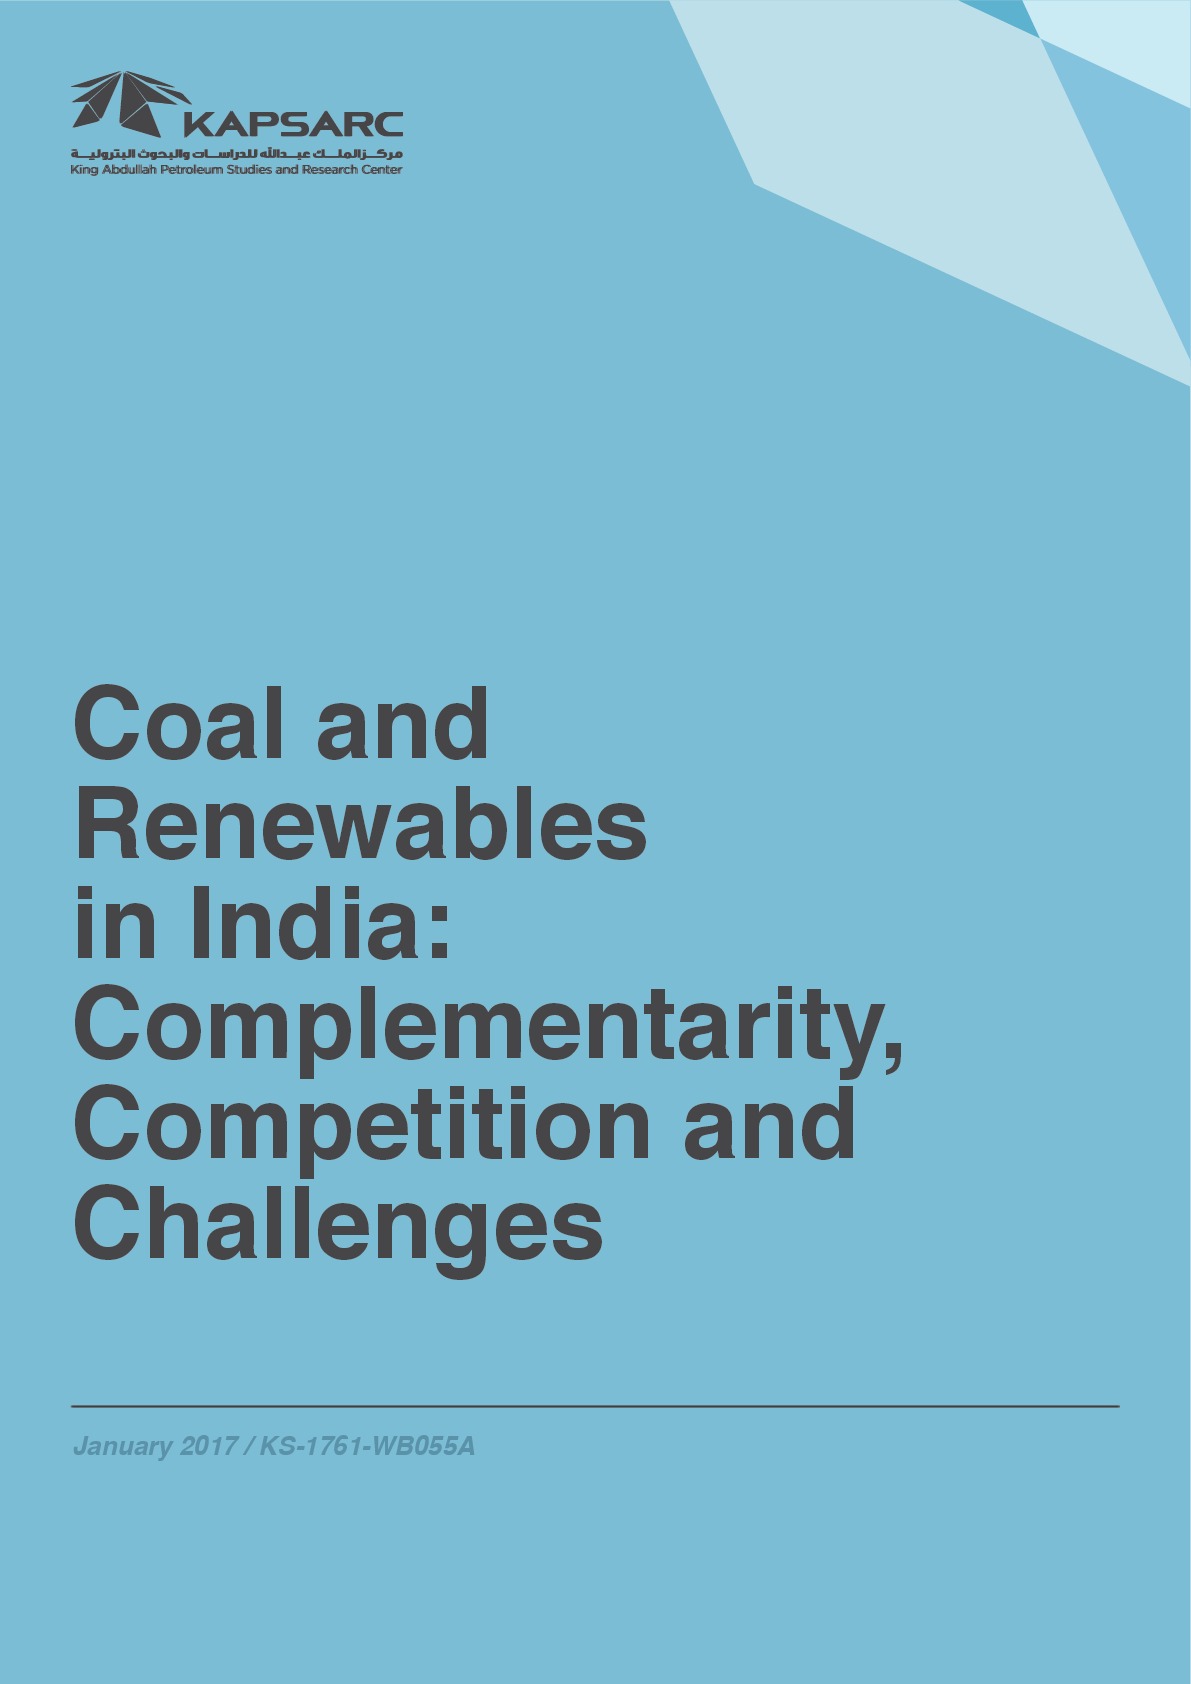 Coal and Renewables in India: Complementarity, Competition and Challenges